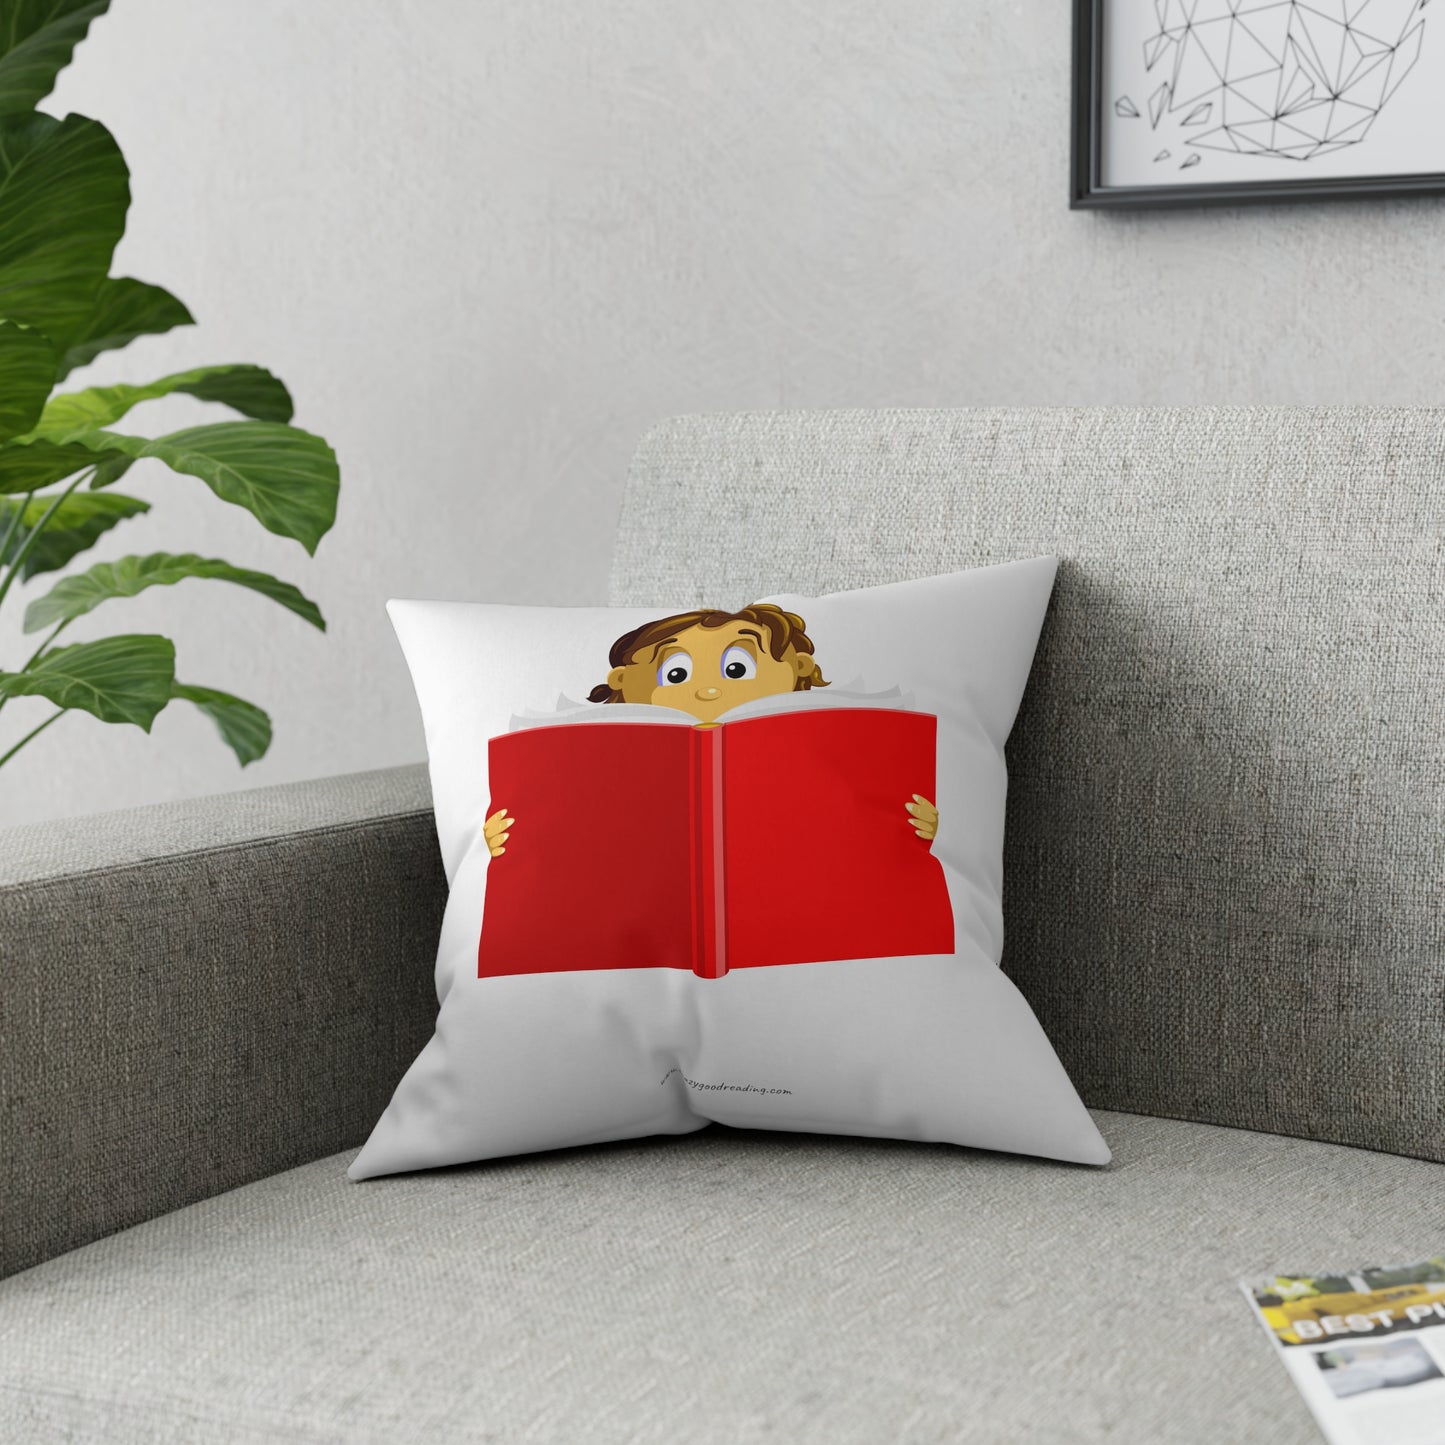 Broadcloth Pillow Girl Reading